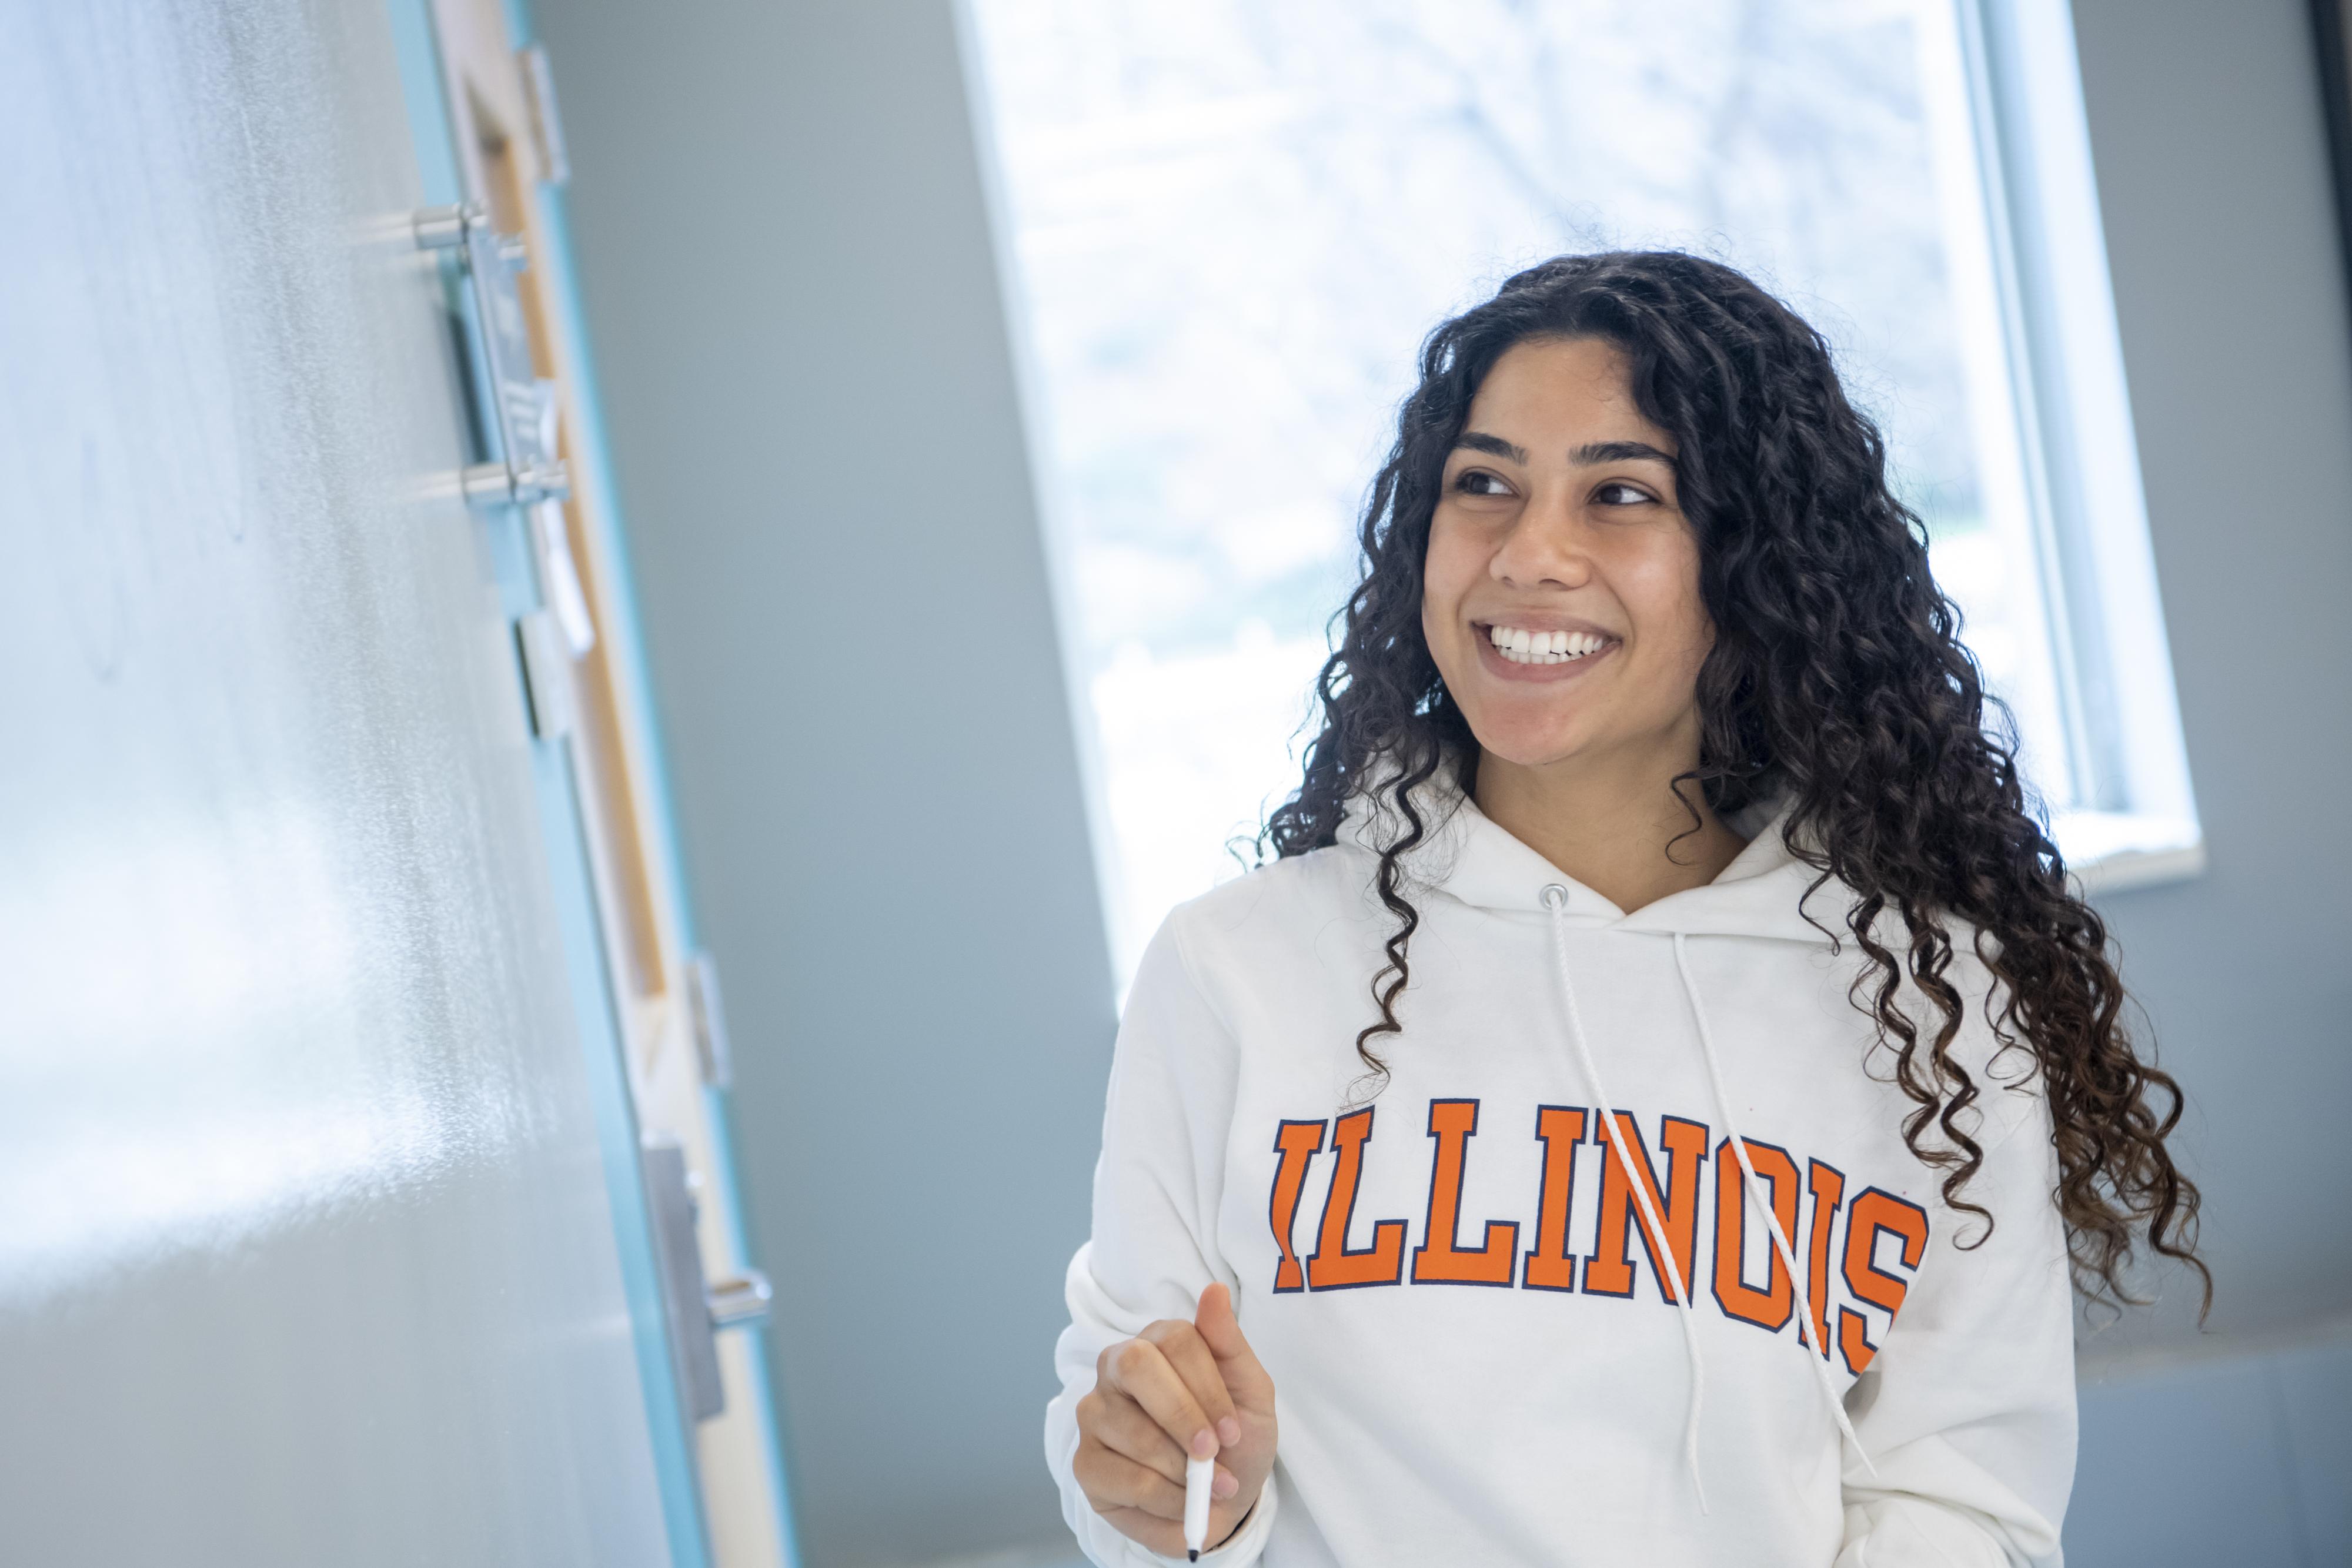 student smiling wearing an illinois shirt